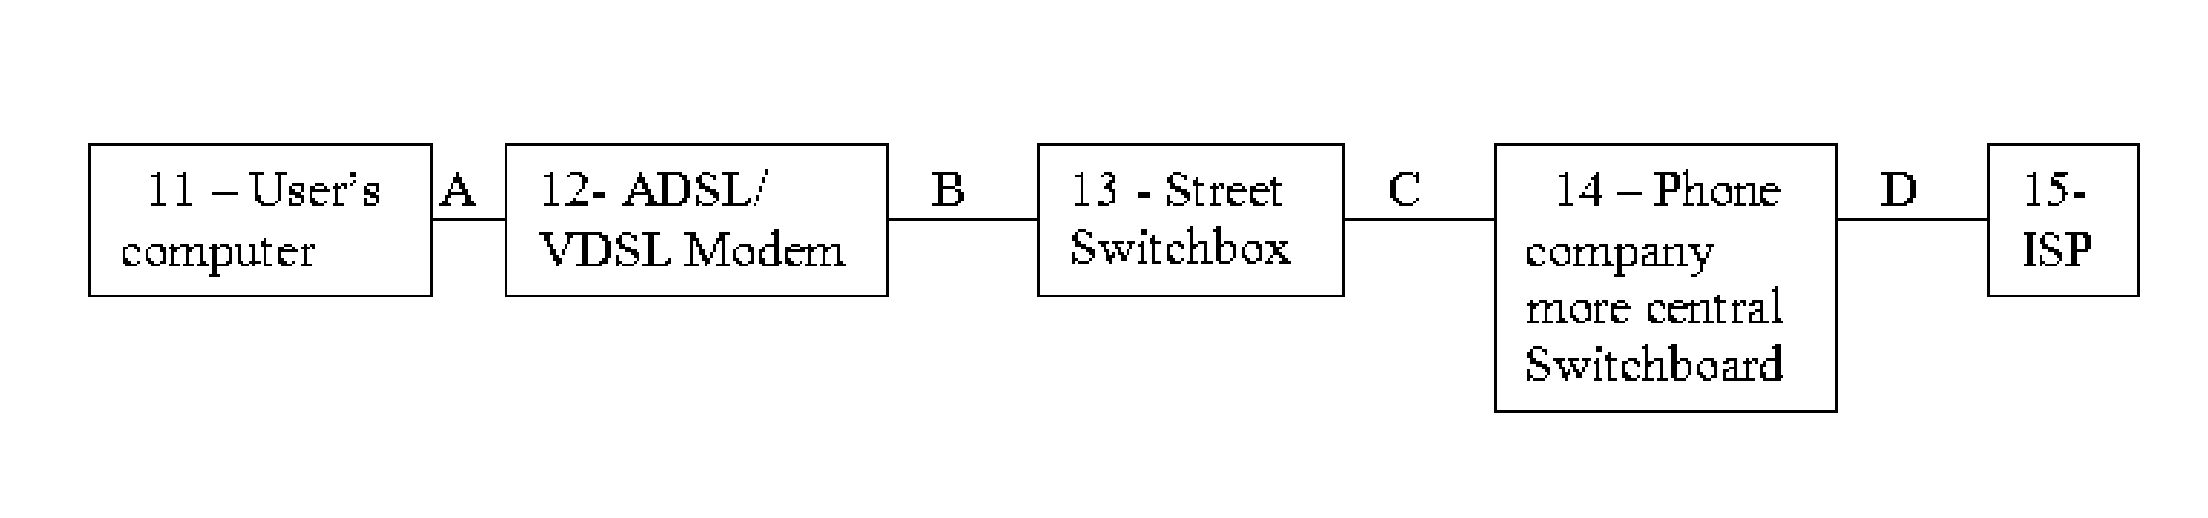 System and method for improving the balance between download and upload traffic on the Internet and/or other networks.